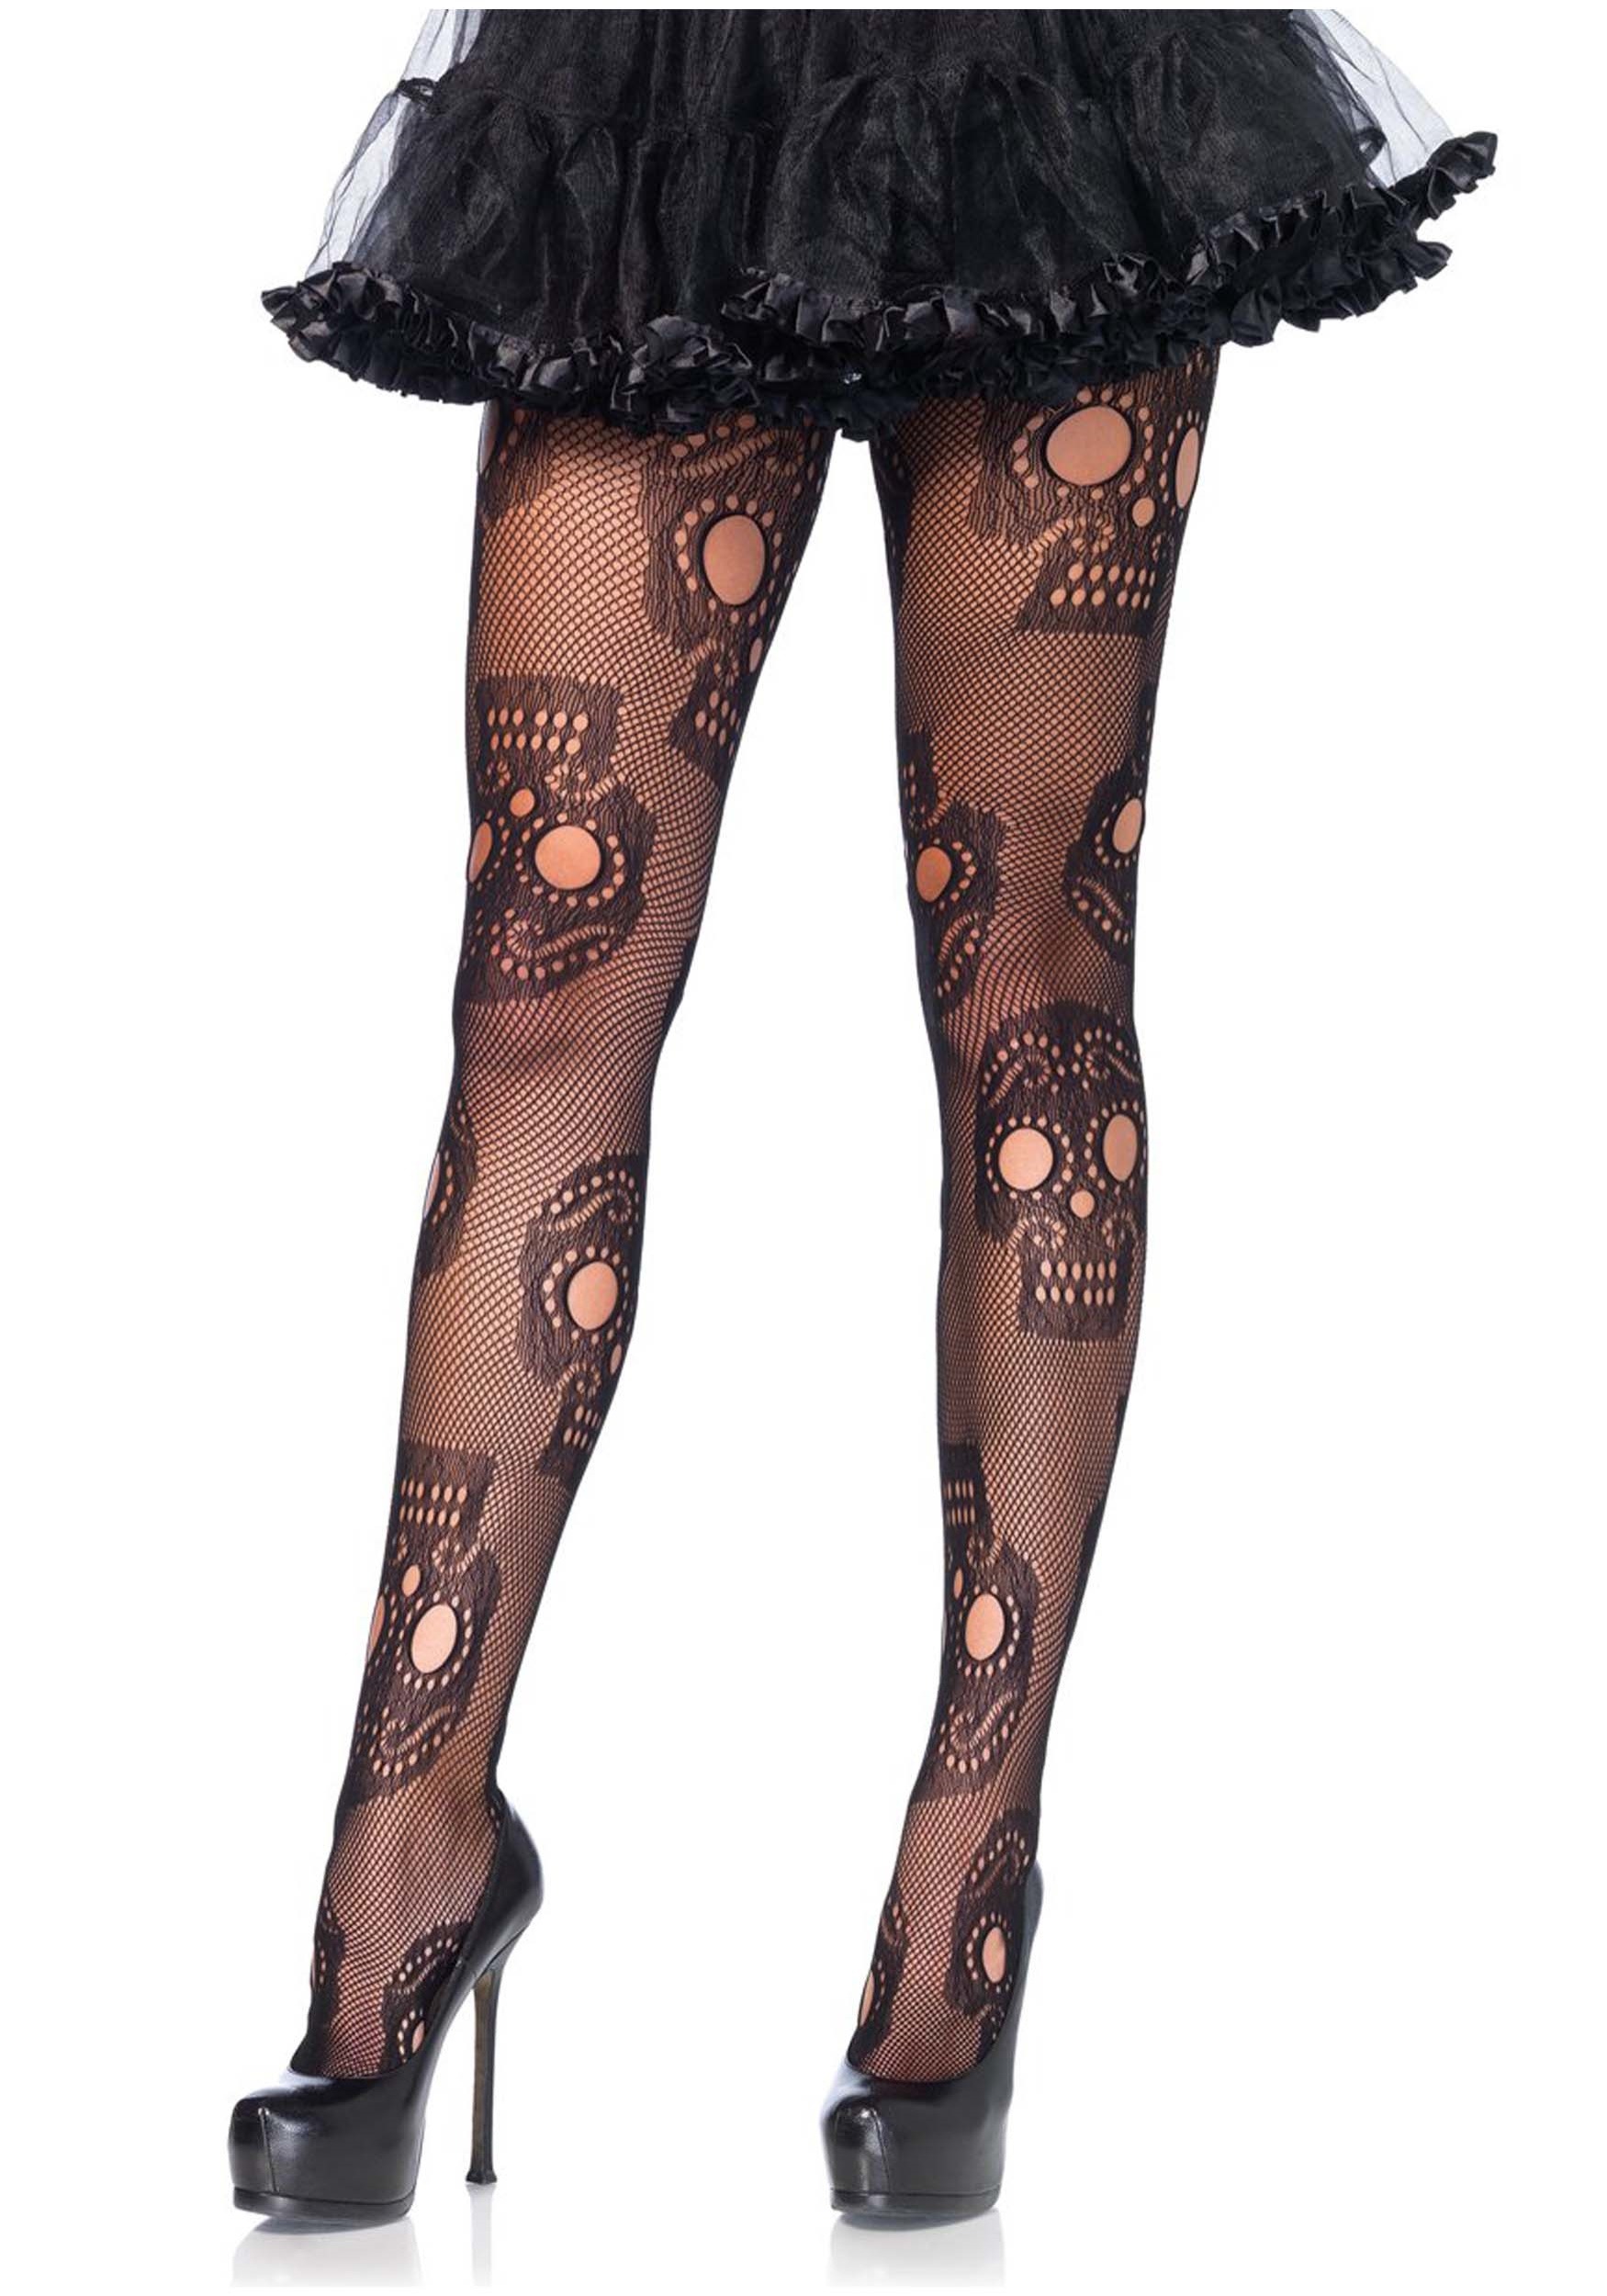 Plus Size Womens Day of the Dead Tights